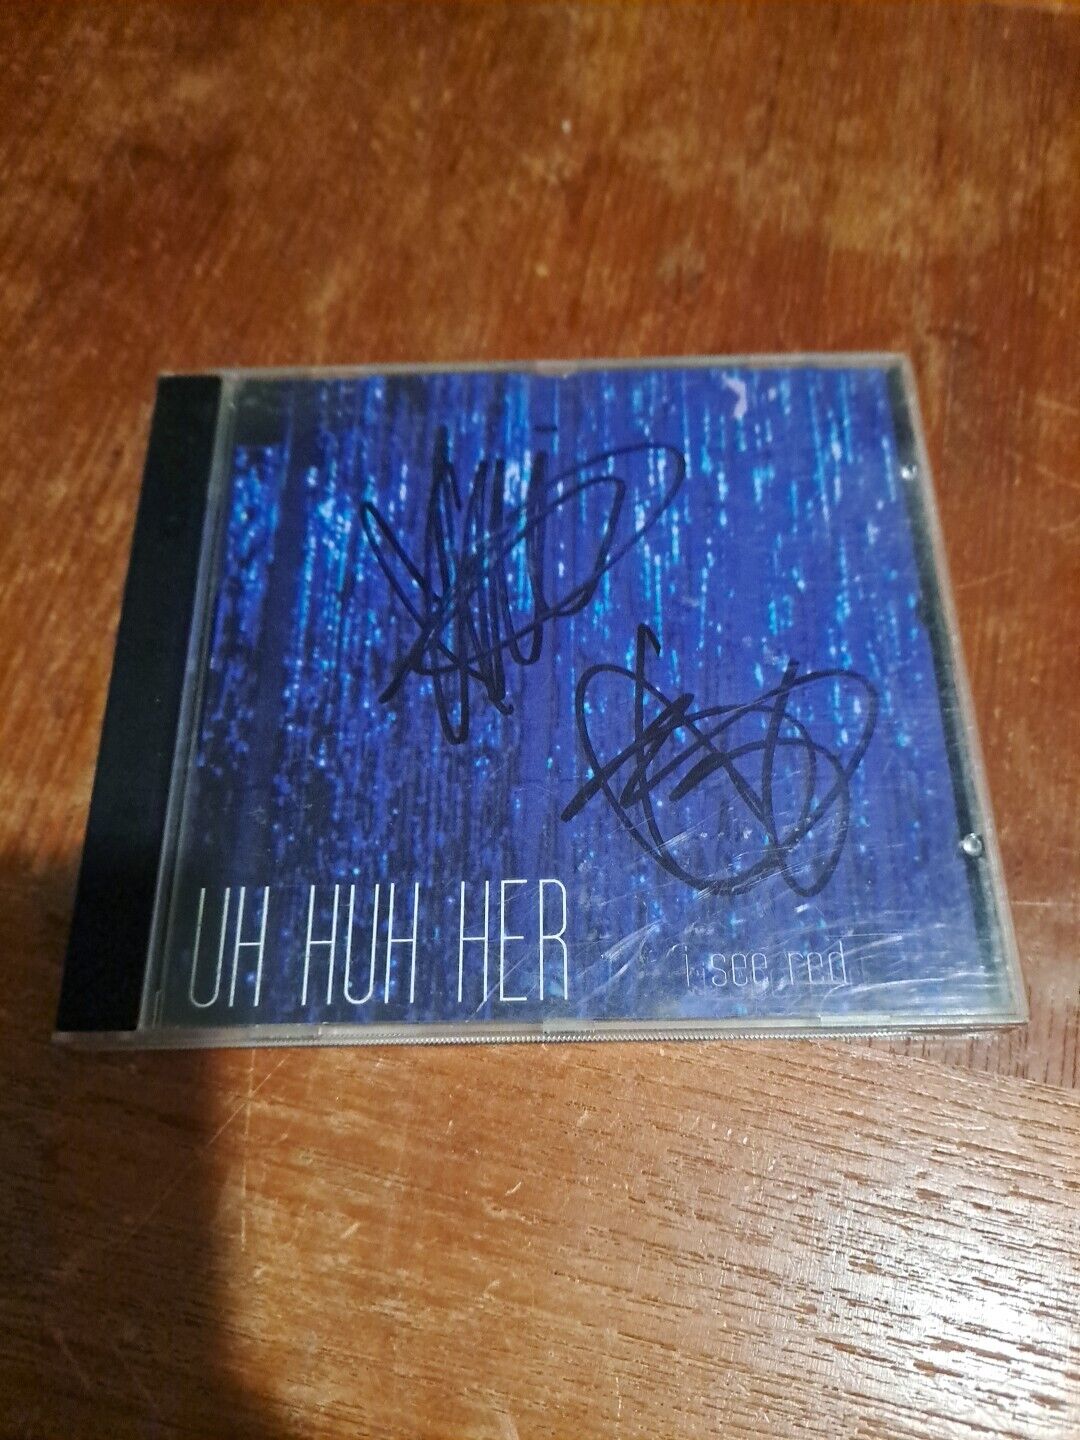 VERY RARE - HTF - OOP - AUTOGRAPHED Uh Huh Her - I See Red (CD, 2007)